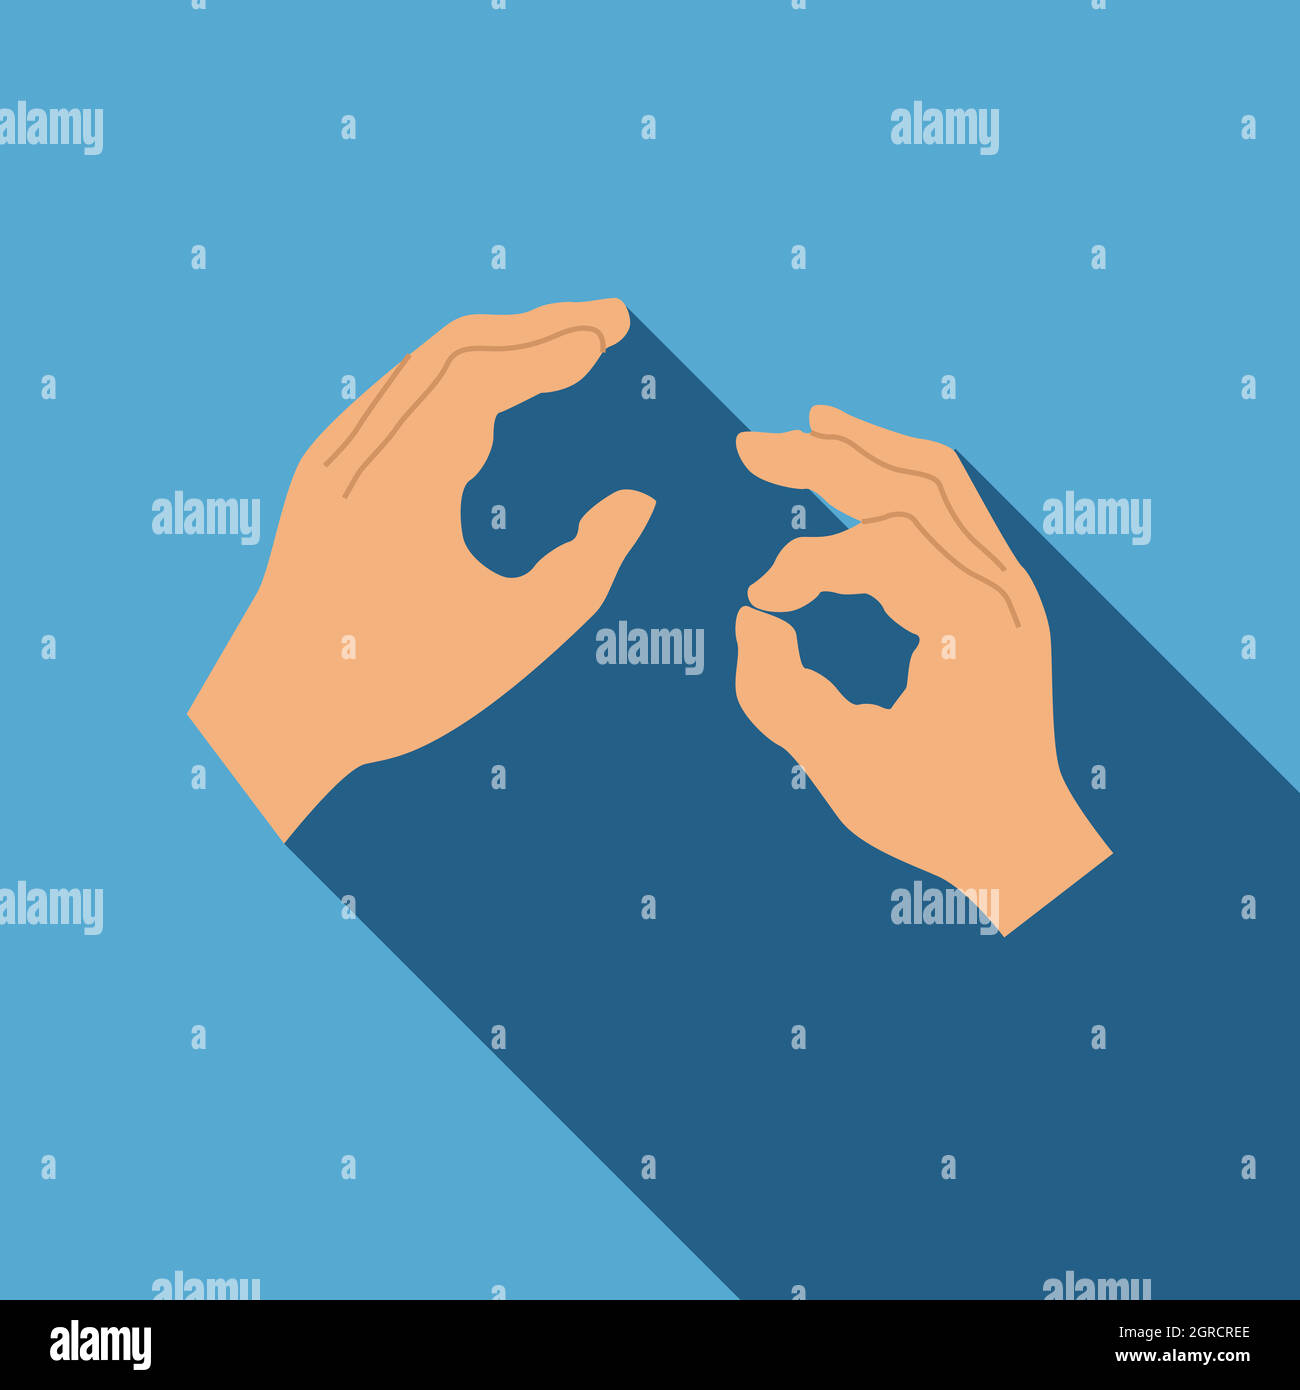 Hand sign language icon, flat style Stock Vector